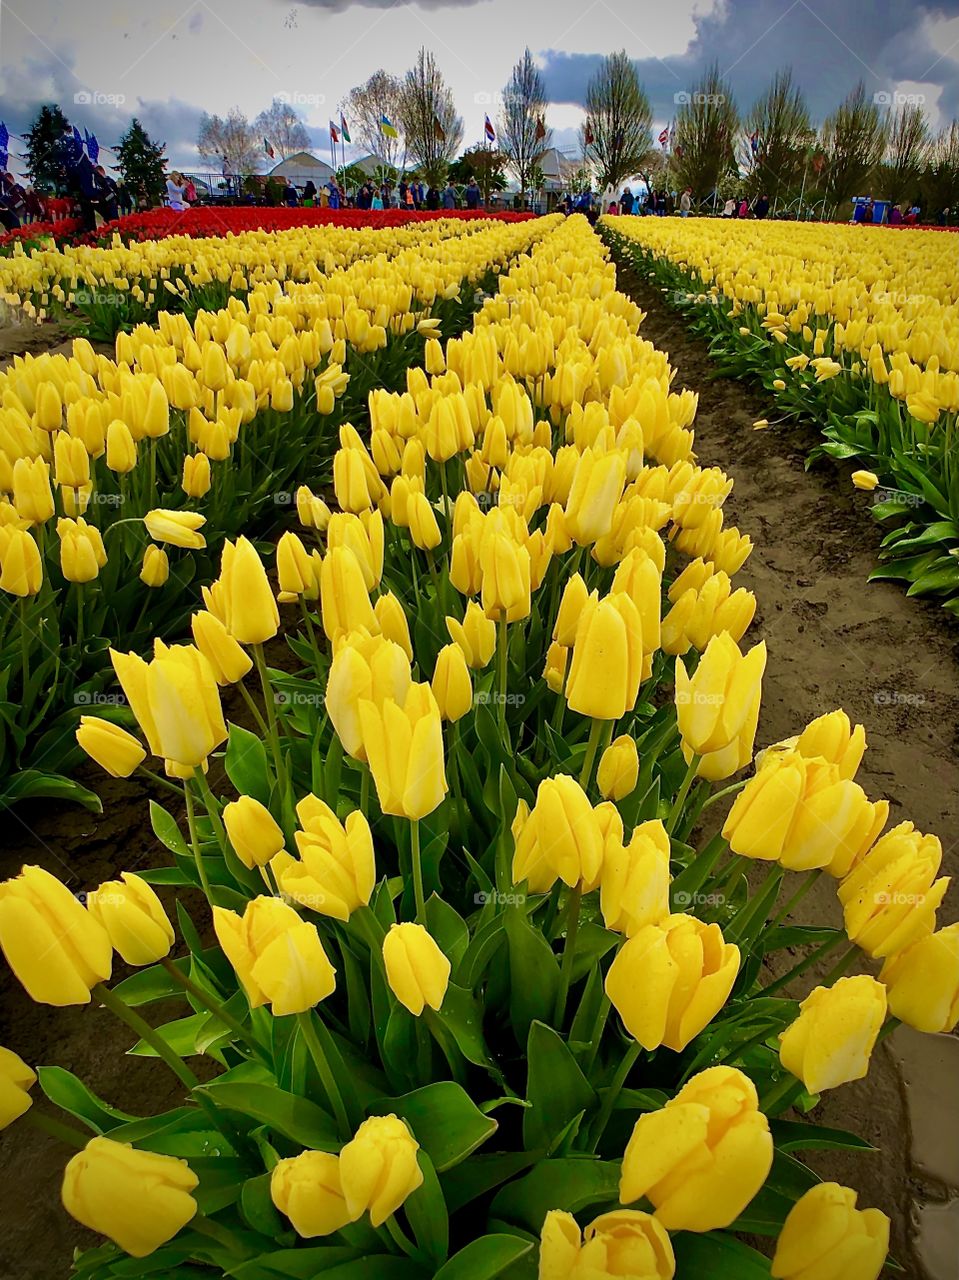 Foap Mission “Picture Perfect Earth”! Beautiful Yellow Tulip Fields of Washington State!